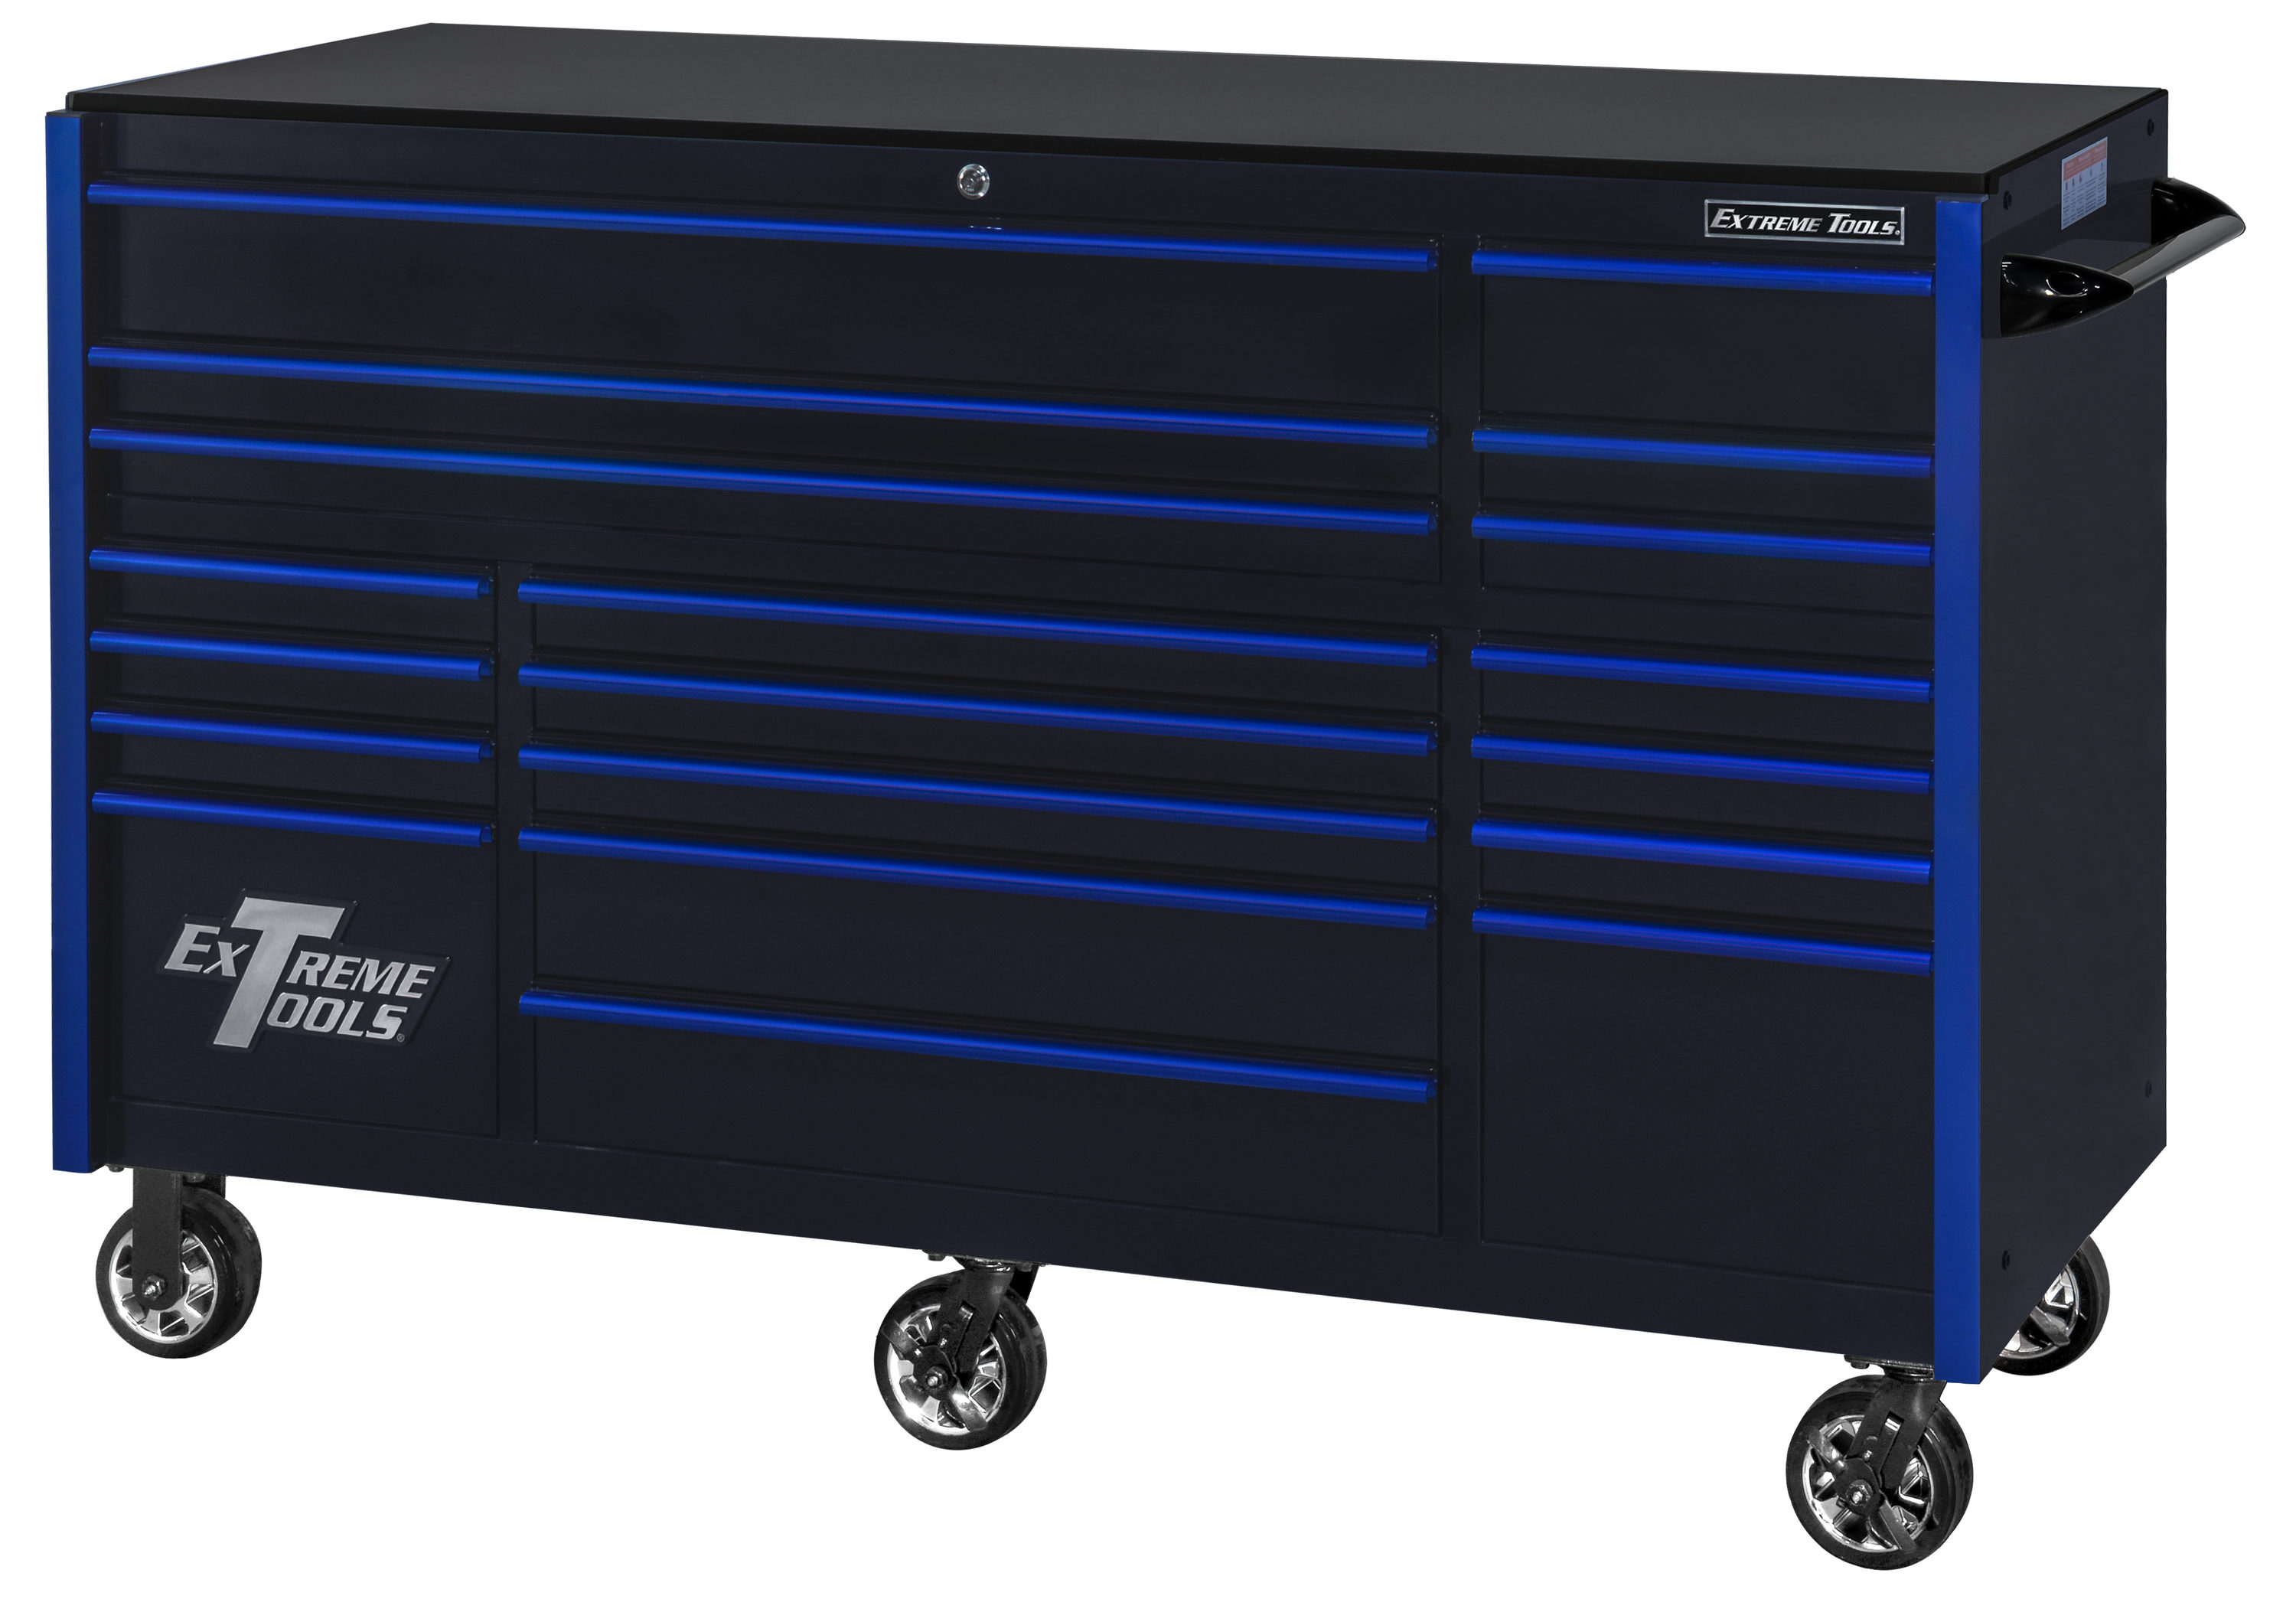 Clearance Shop Equipment & Tool Boxes - Clearance